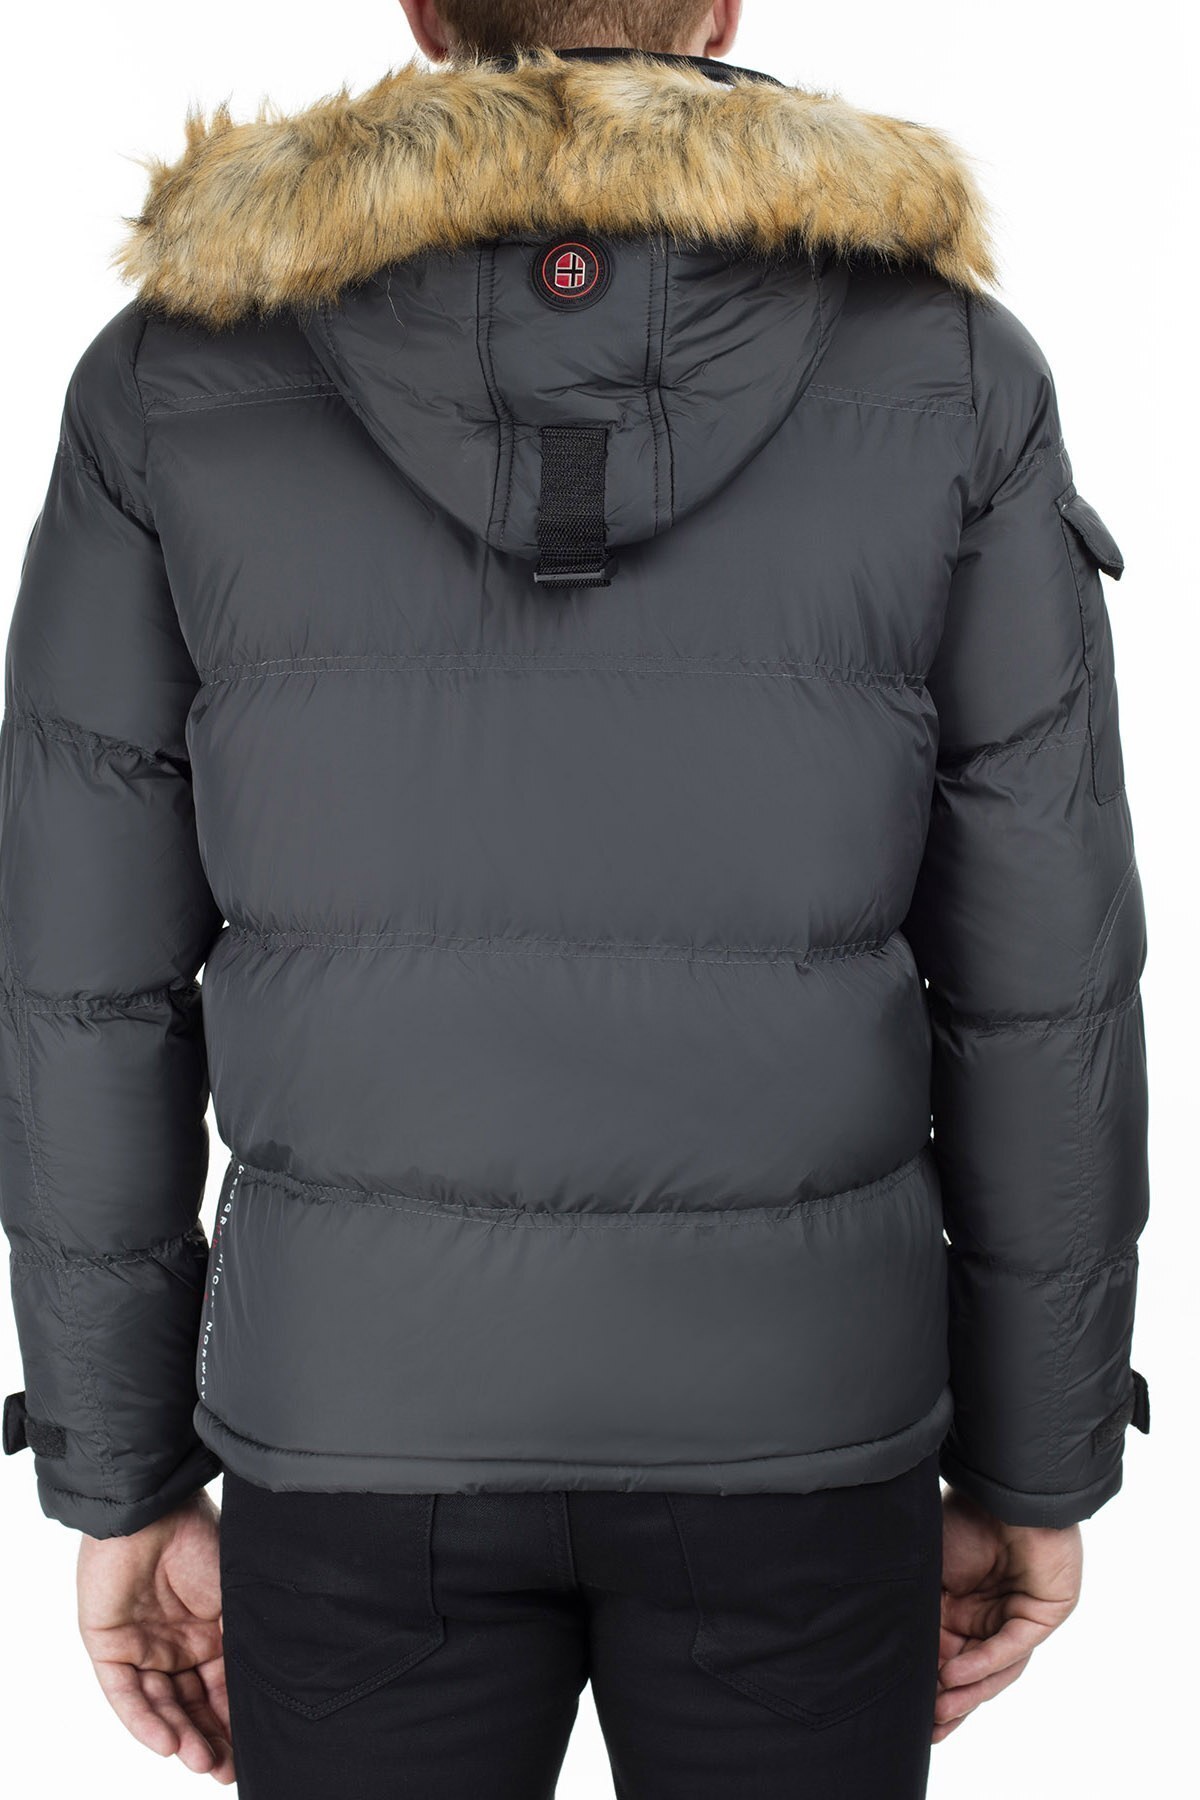 Norway Geographical Outdoor Erkek Mont CLEMENT ANTRASİT